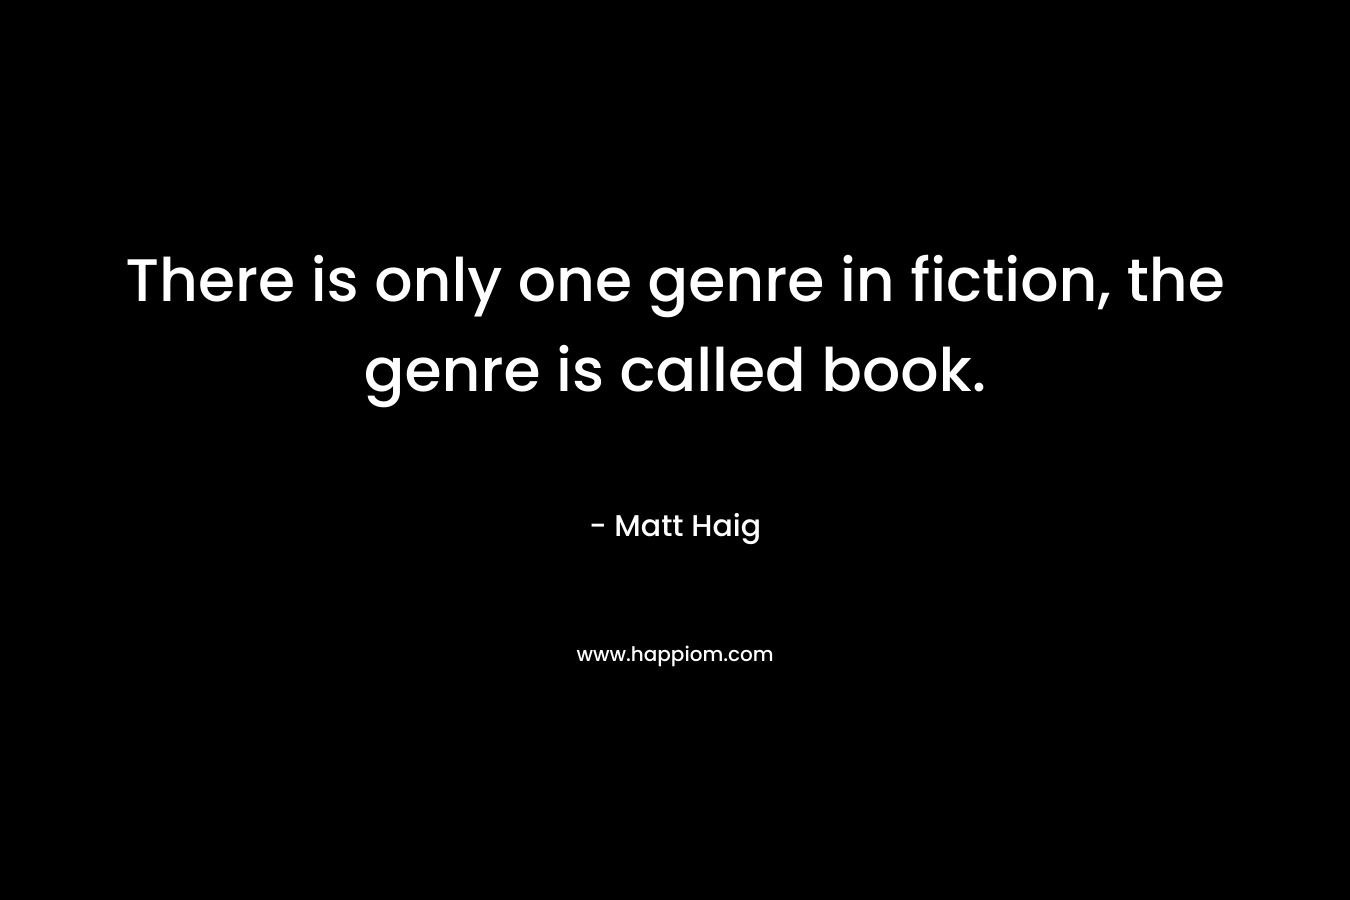 There is only one genre in fiction, the genre is called book.